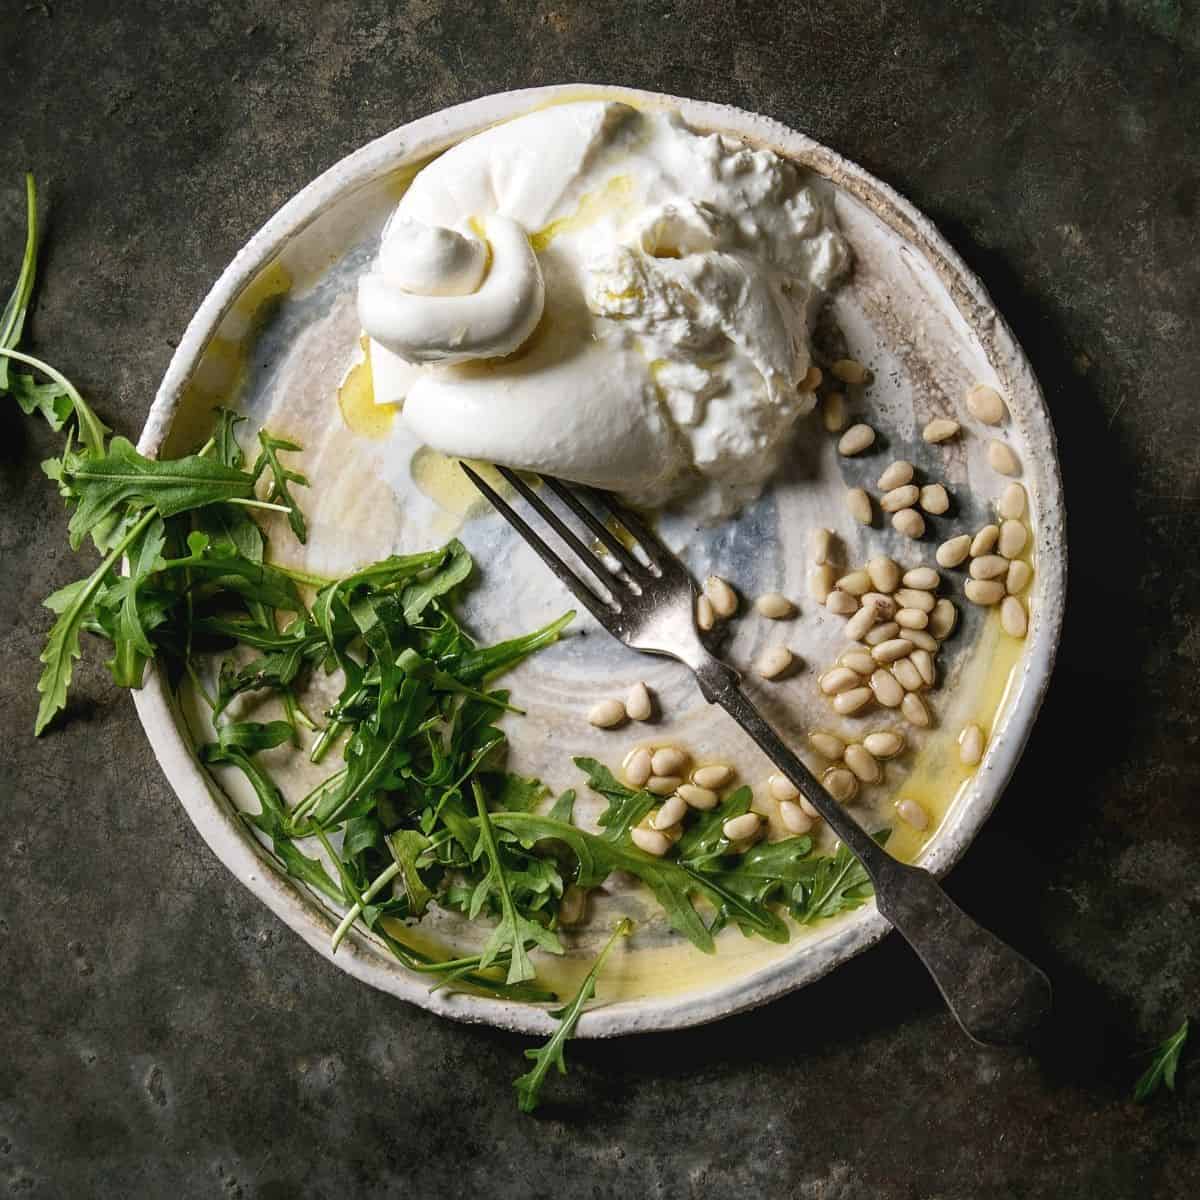 What is burrata and why it tastes so good